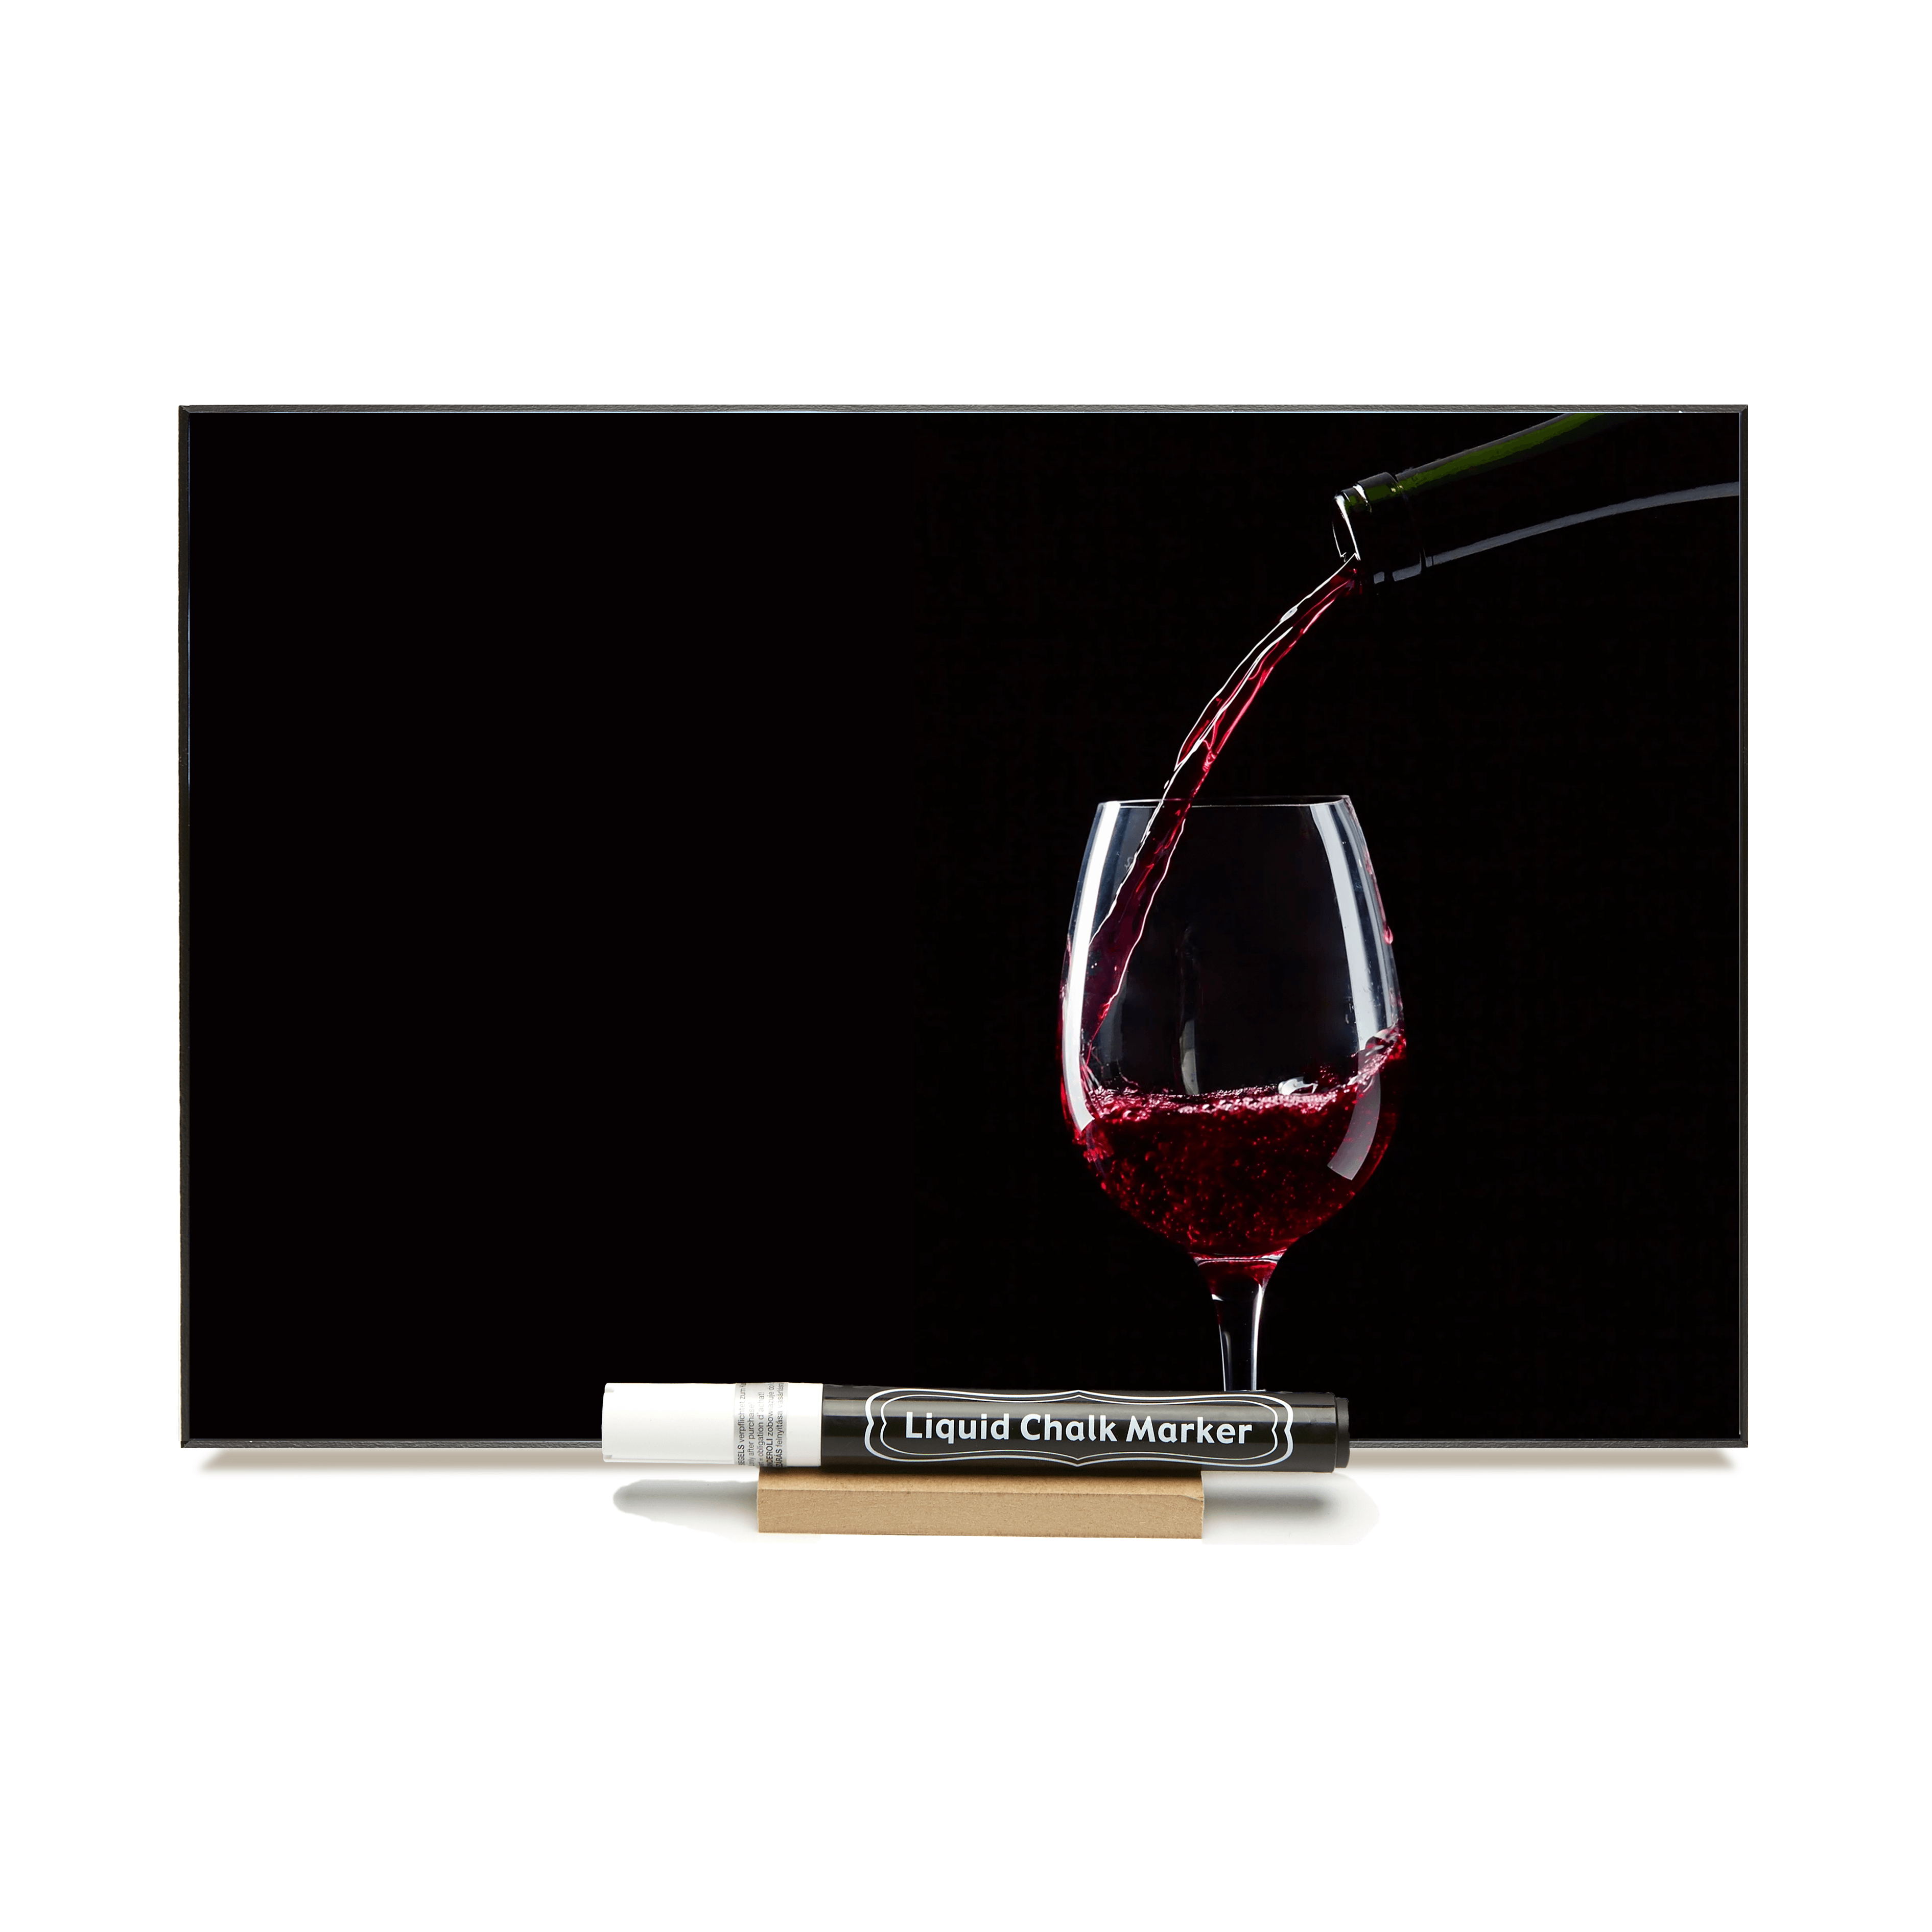 "Red Wine Pouring" PHOTO CHALKBOARD Includes Photo Chalkboard, Chalk Marker and Stand